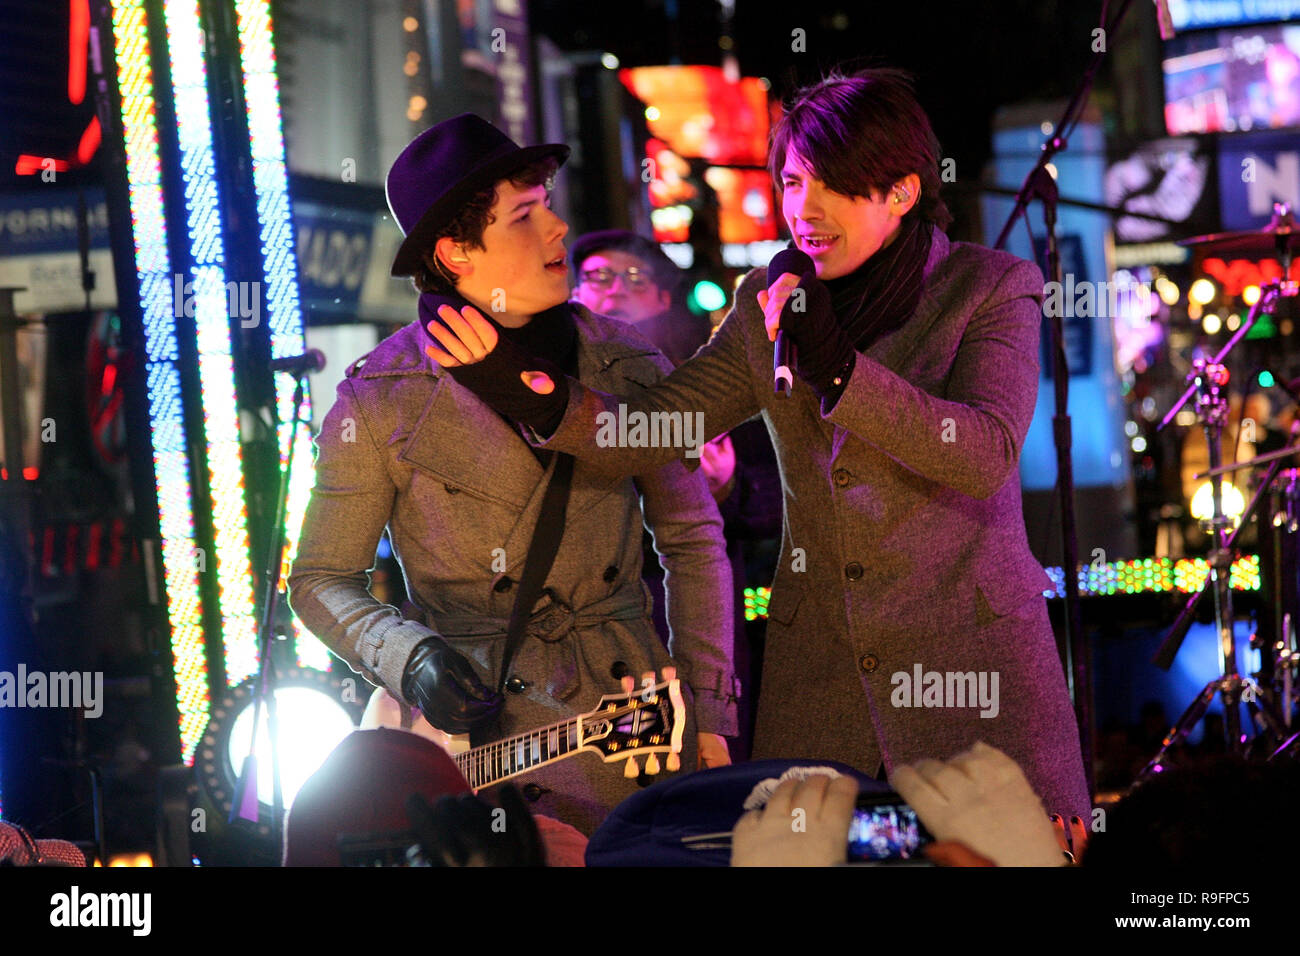 NEW YORK - DECEMBER 31:  Joe Jonas and Kevin Jonas gf the Jonas Brothers perform on stage at the ceremony to lower the New Years Eve ball in Times Square on December 31, 2008 in New York City.  (Photo by Steve Mack/S.D. Mack Pictures) Stock Photo